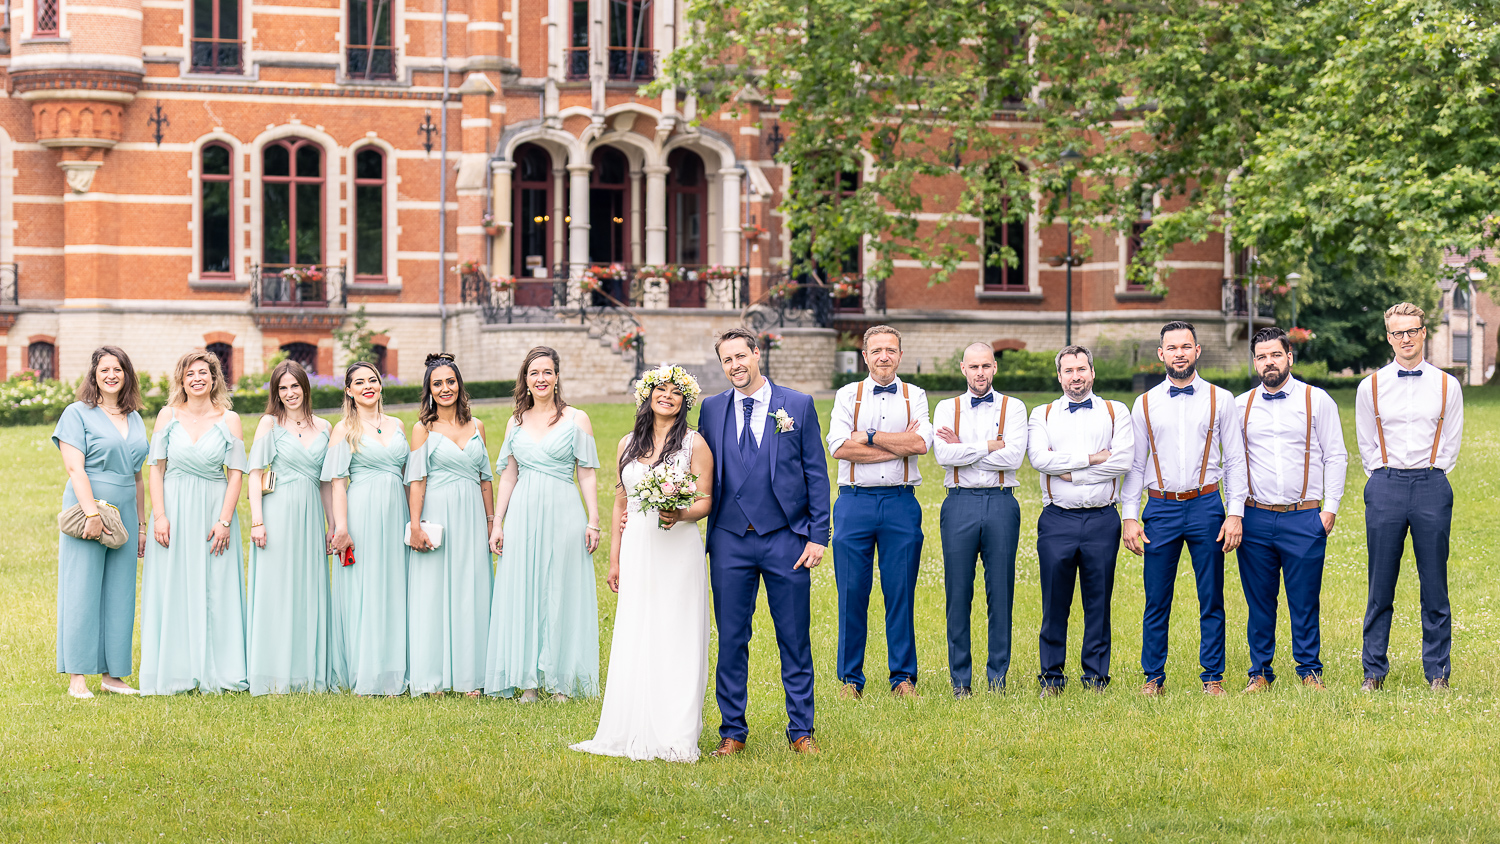 Brussels Wedding photographer - Bridesmaids and groomsmen group photo